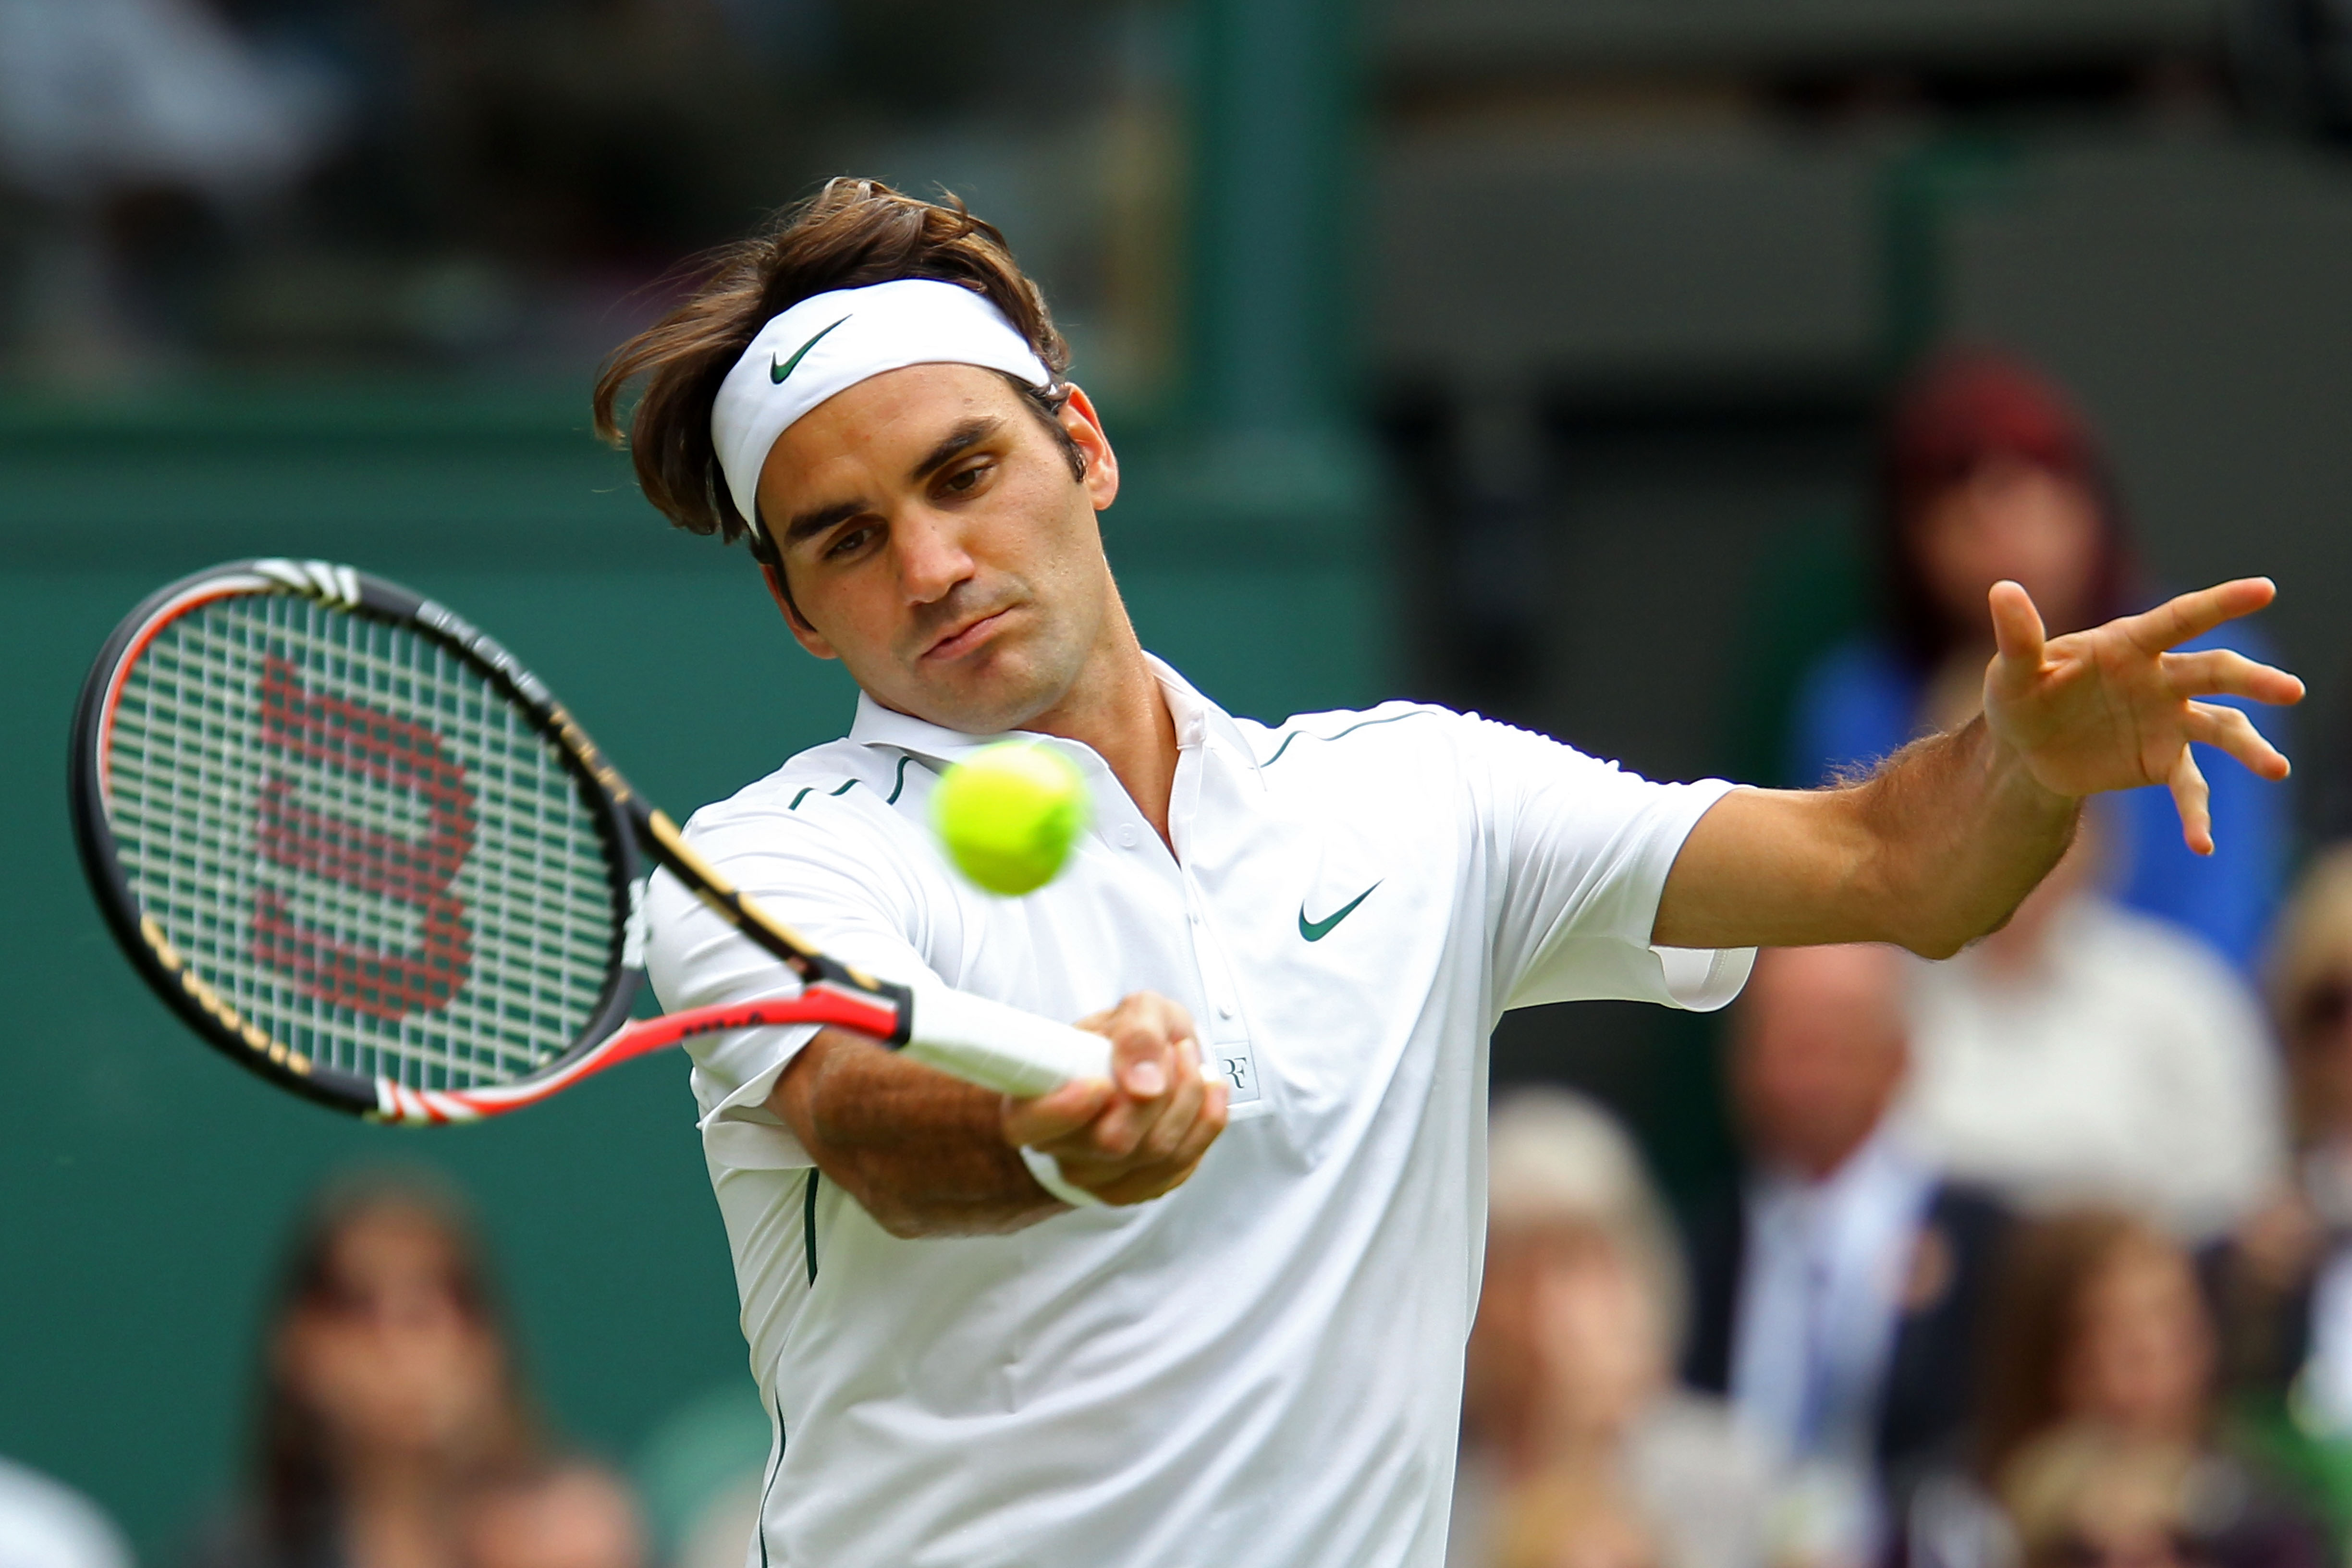 LONDON, ENGLAND - JUNE 21:  Roger Federer of Switzerland returns a shot during his first round match against Mikhail Kukushkin of Kazakhstan on Day Two of the Wimbledon Lawn Tennis Championships at the All England Lawn Tennis and Croquet Club on June 21,